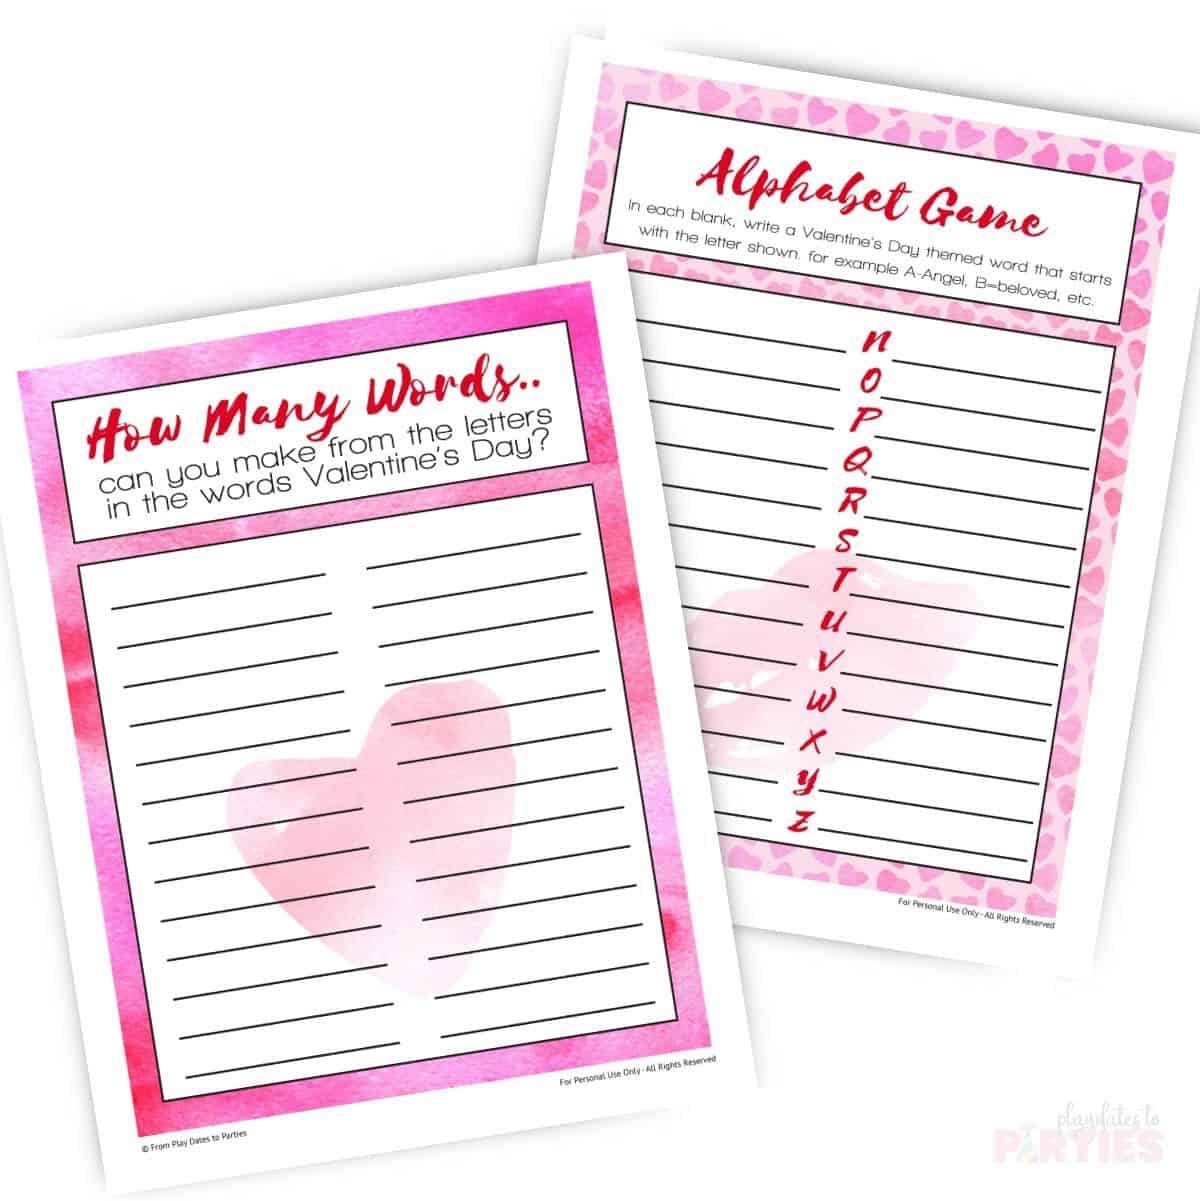 Valentine Word Games pages.